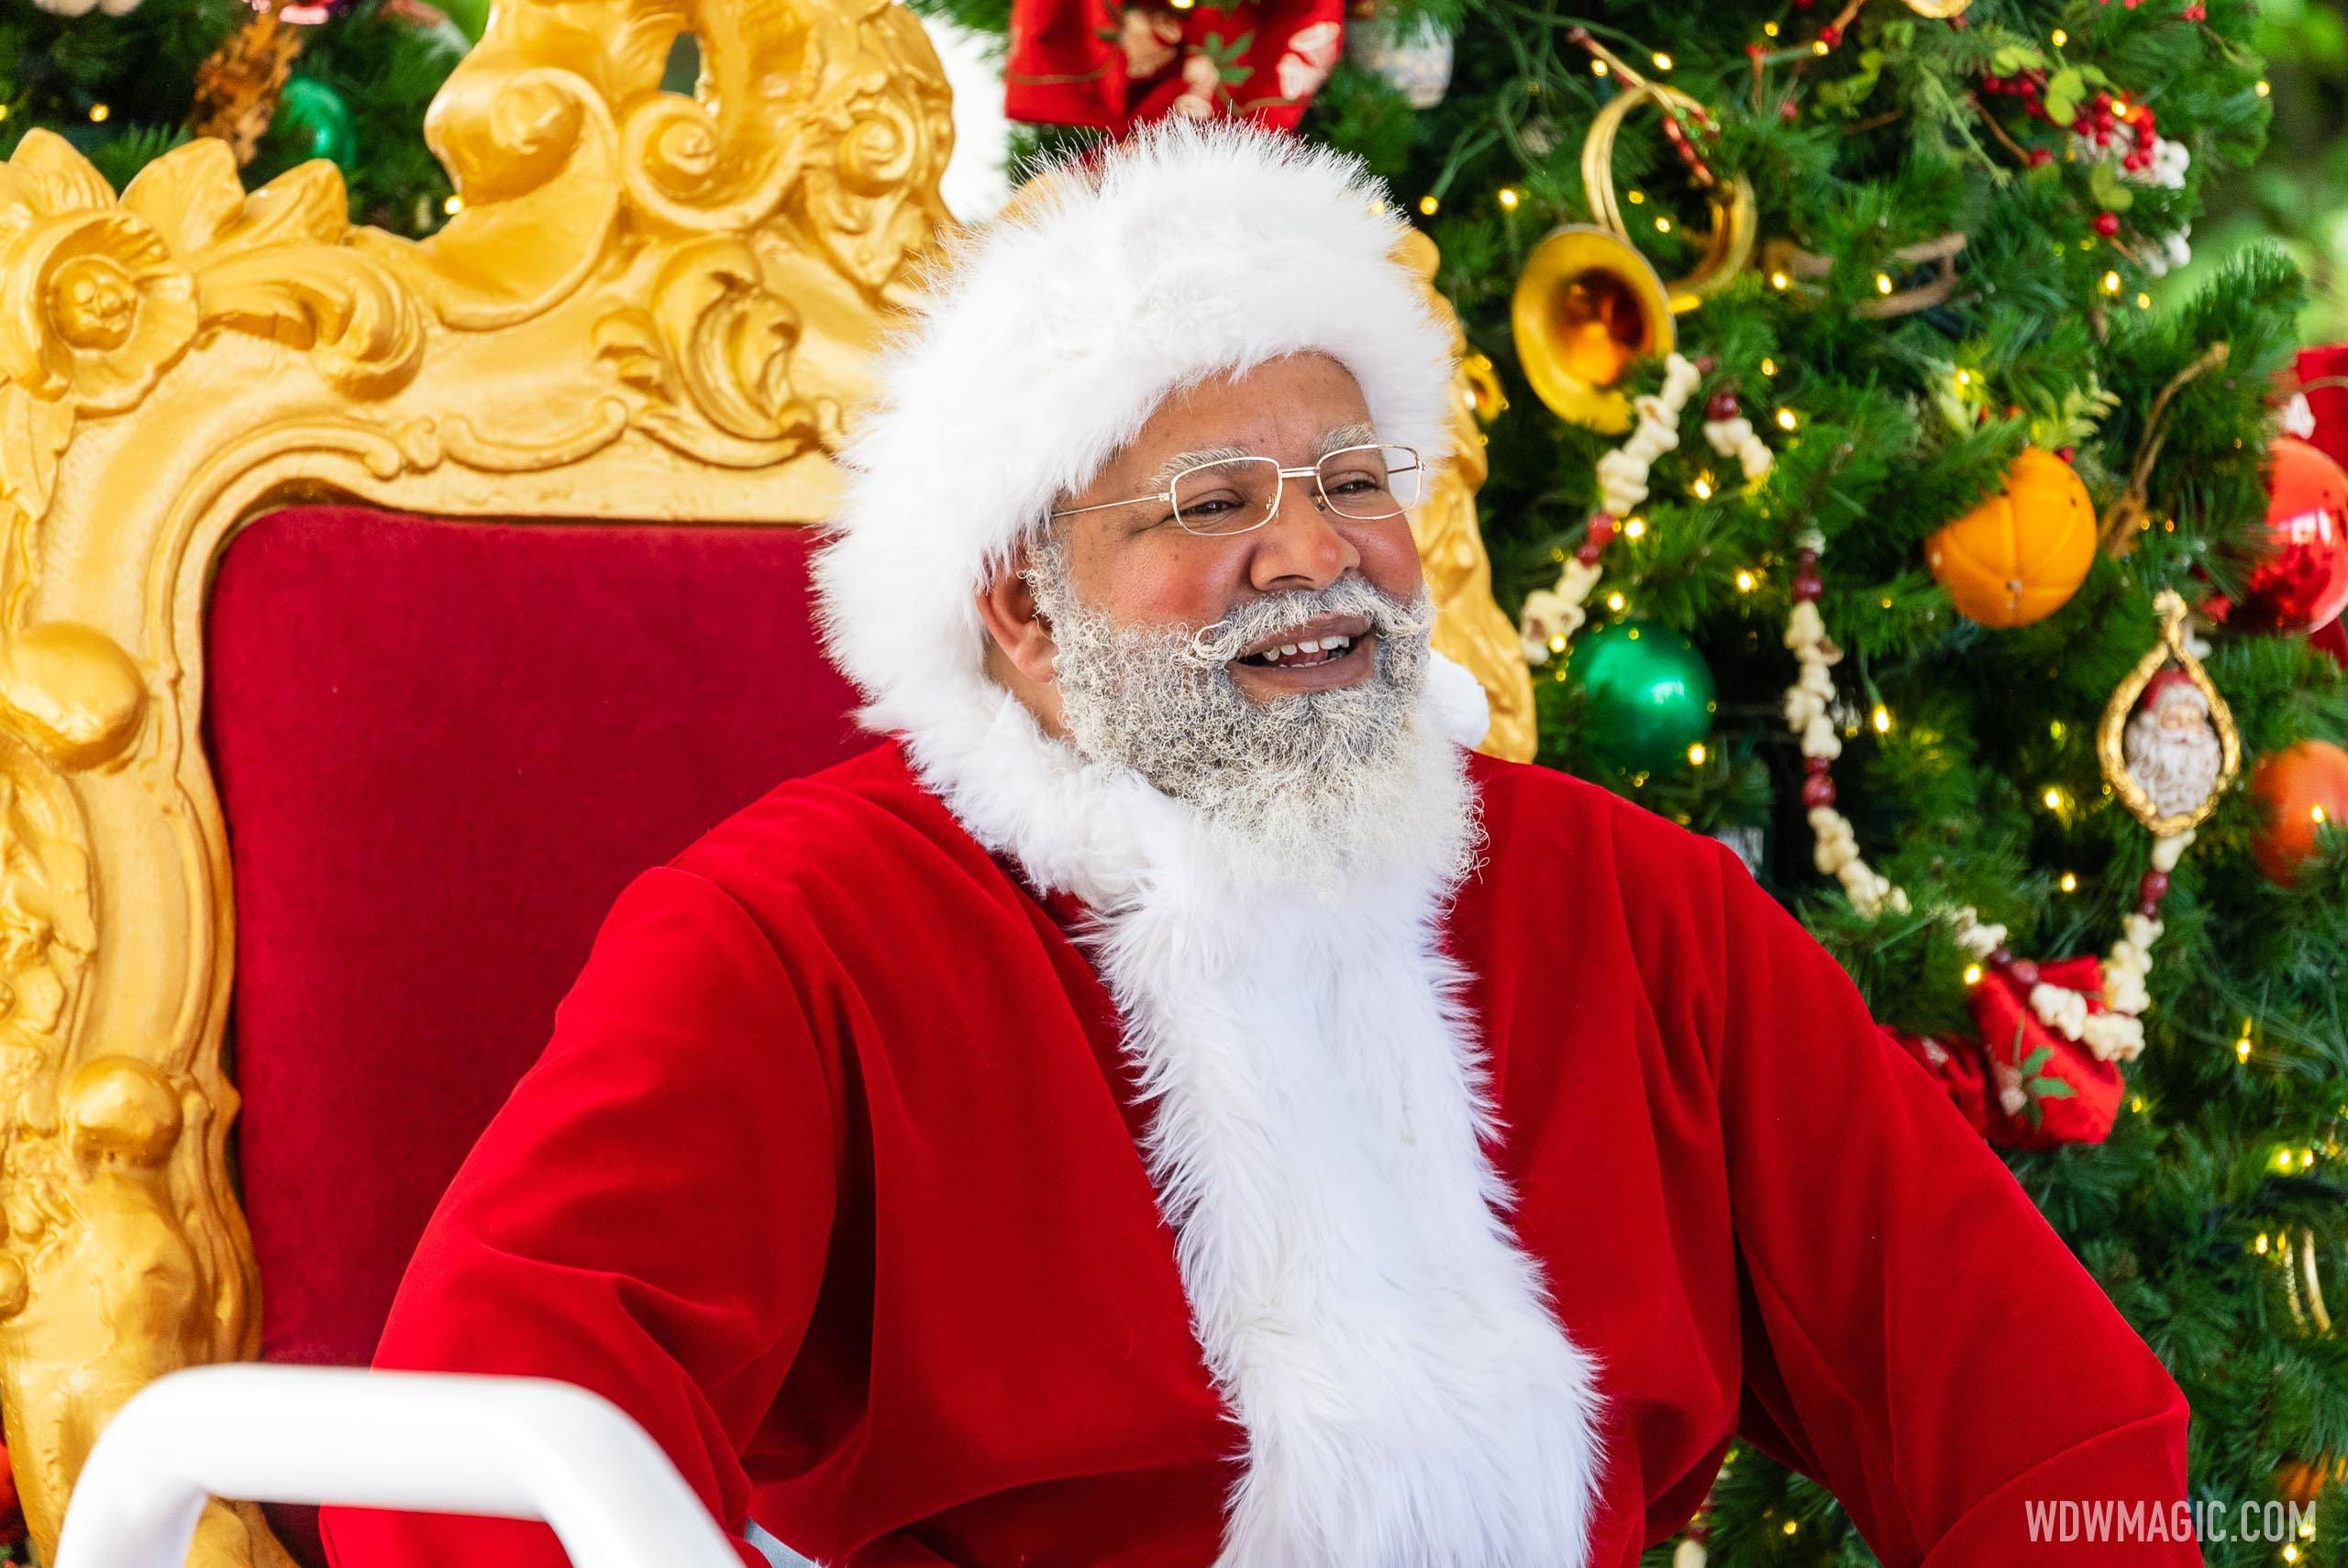 Santa Claus meet and greet returns this year to the EPCOT International Festival of the Holidays